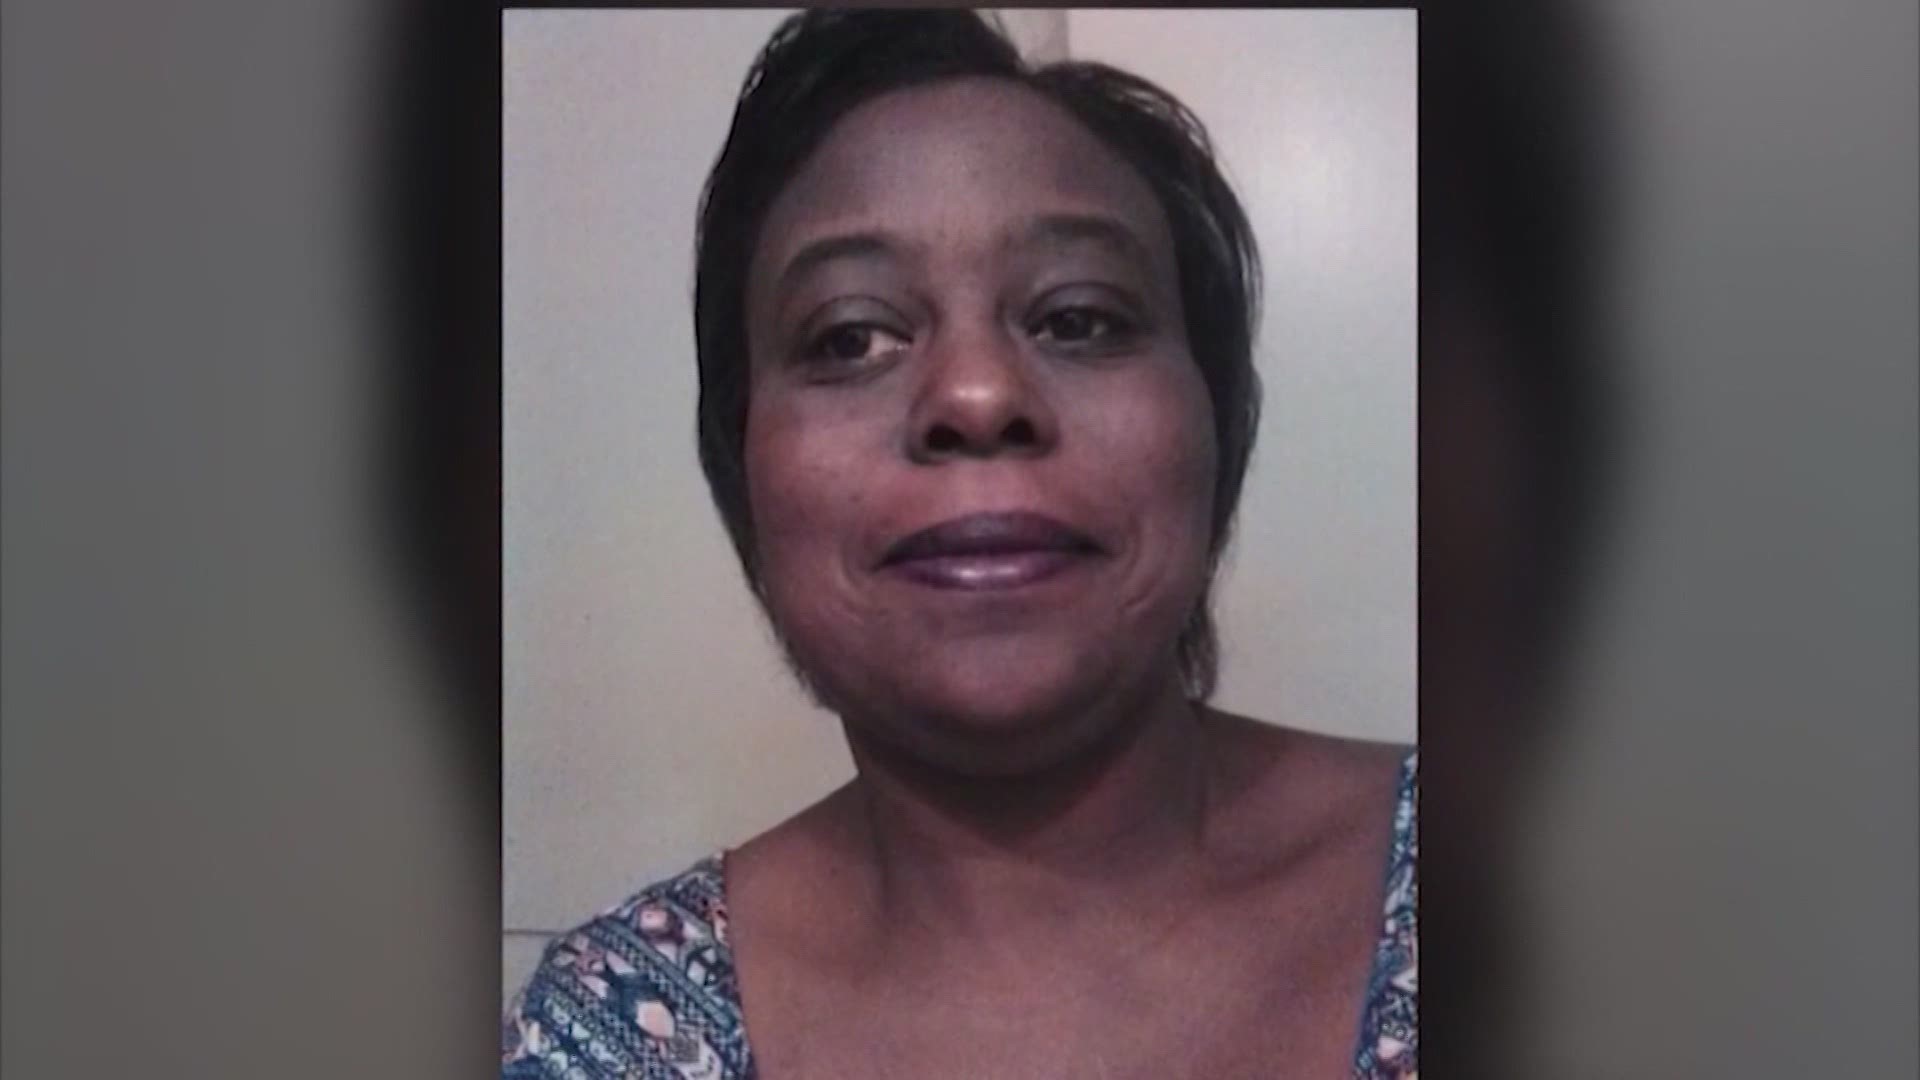 The family of Pamela Turner, who was fatally shot by police in Baytown, is still waiting for justice.